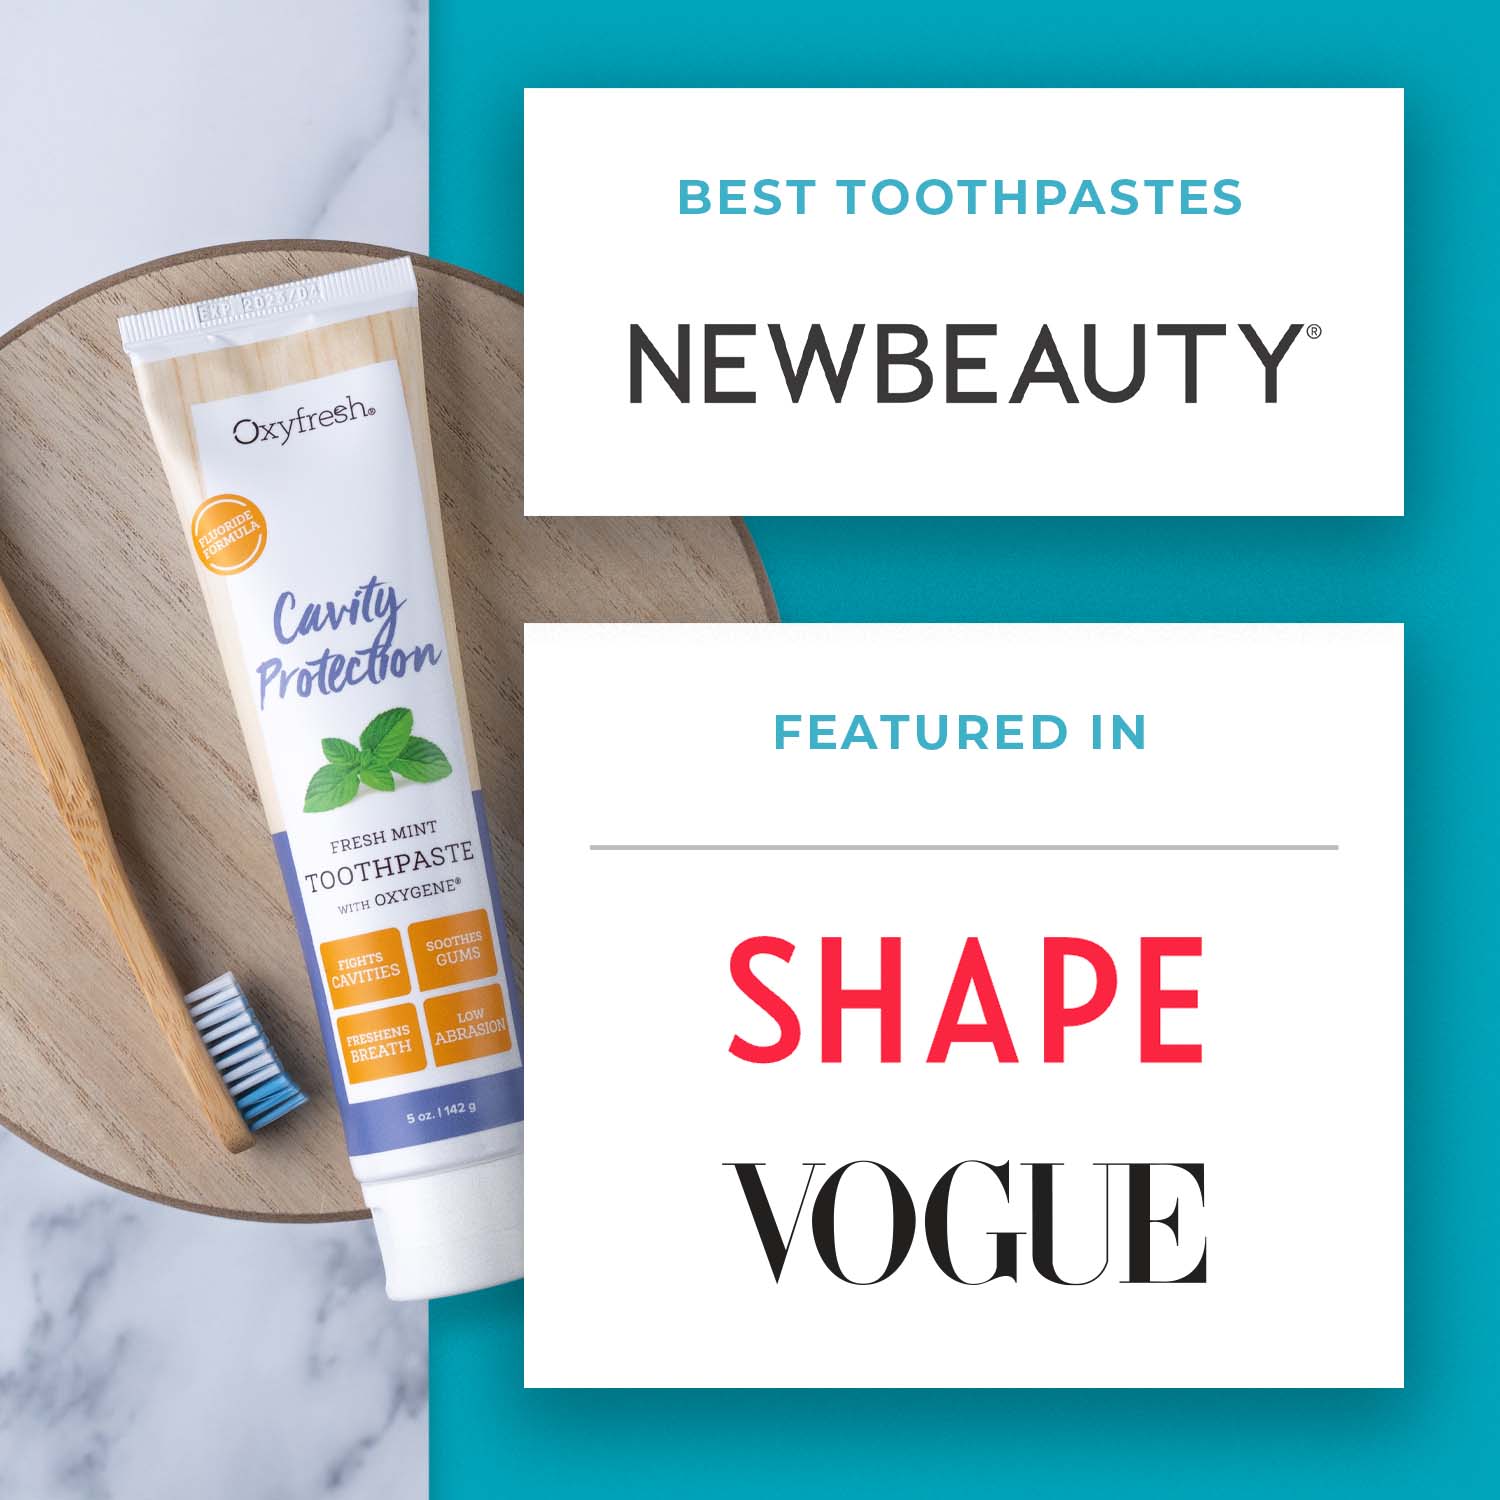 oxyfresh-cavity-protection-fluoride-toothpaste-mentioned in-NEWBEAUTY-SHAPE-and-VOGUE